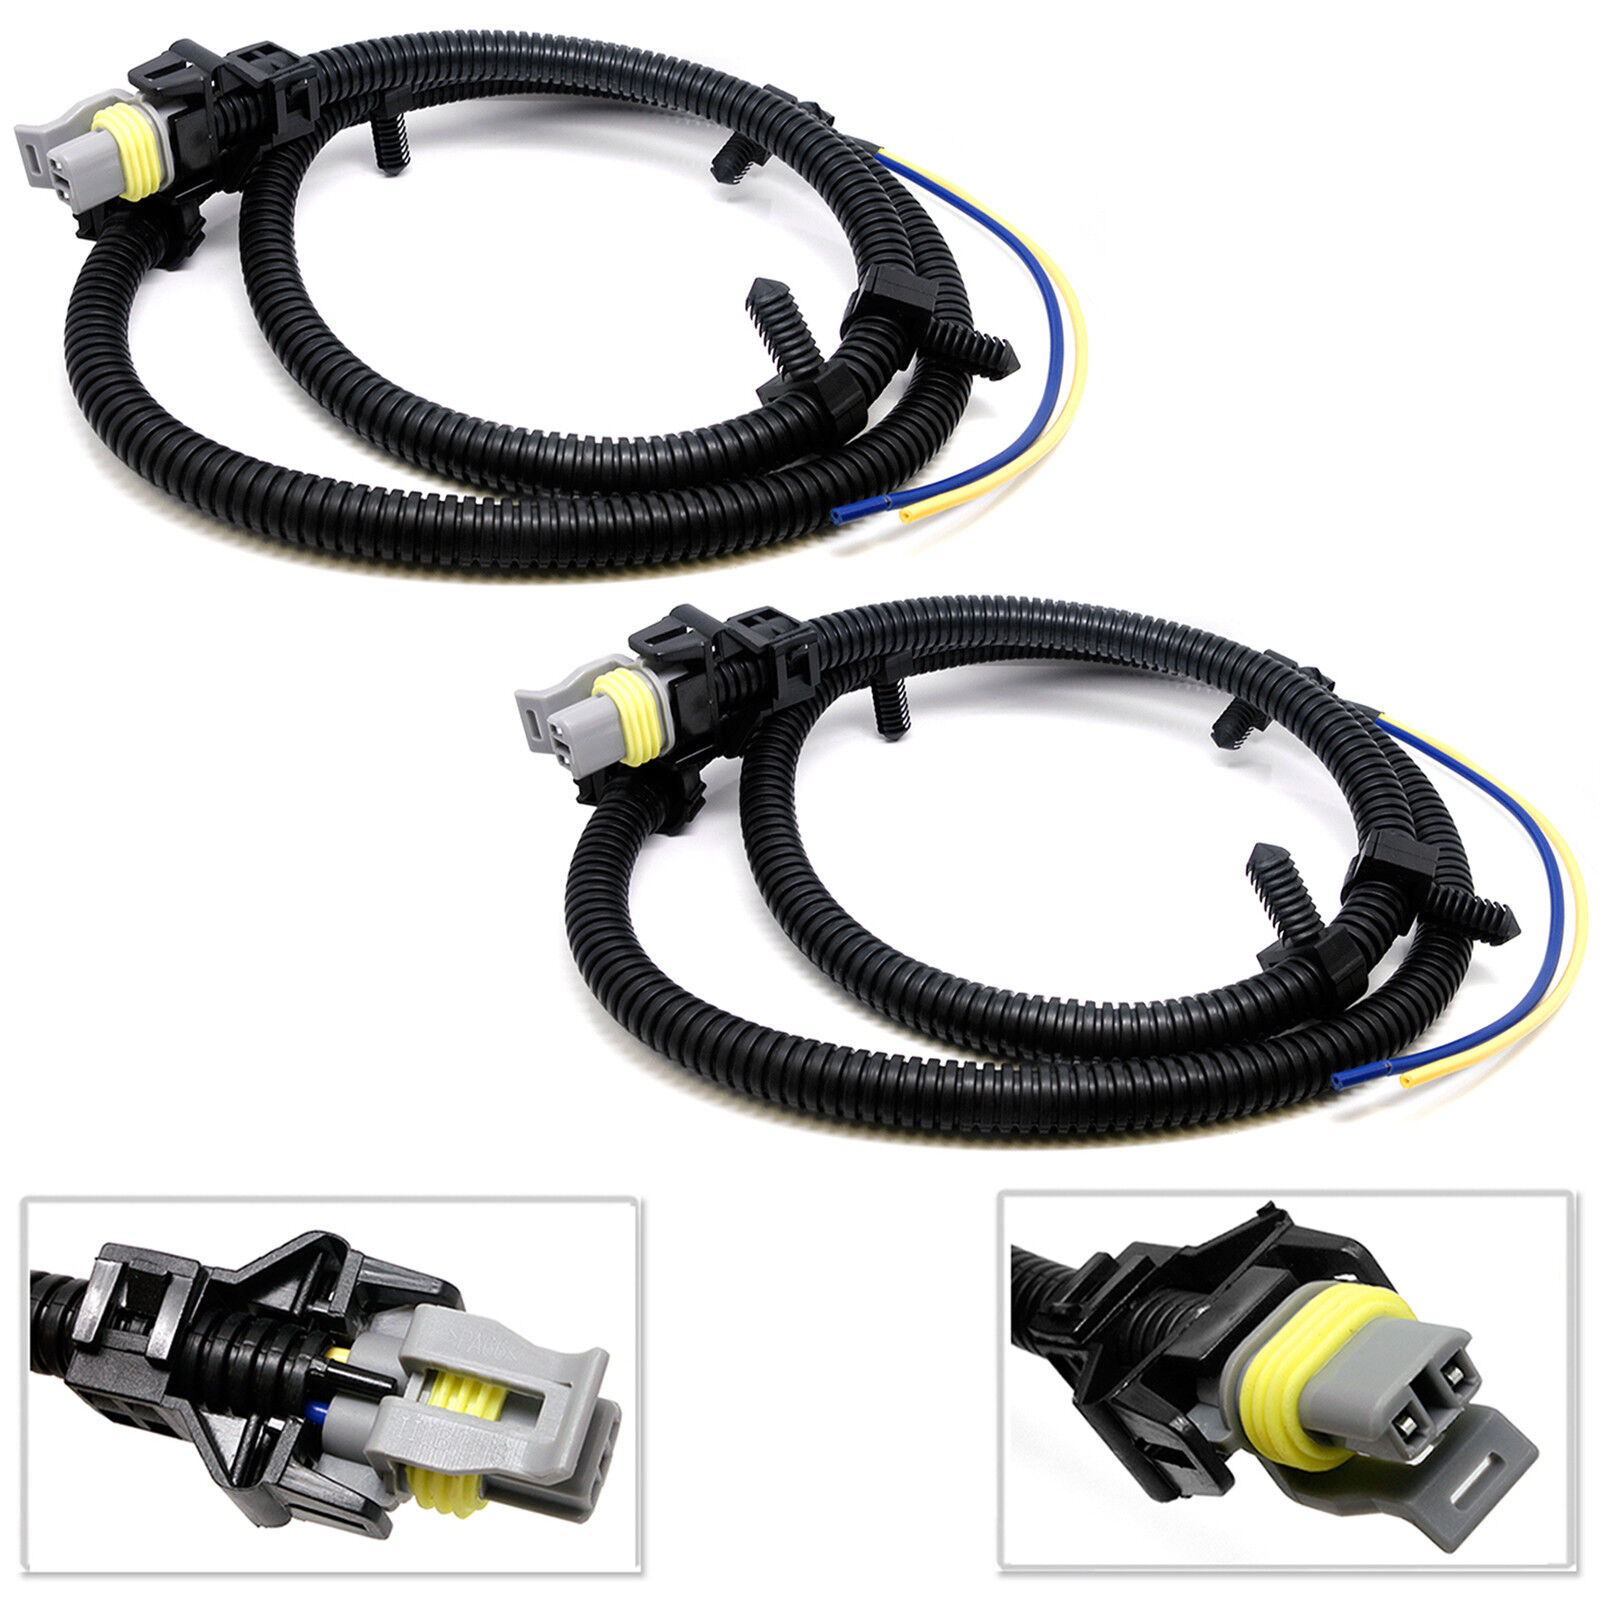 2X ABS Wheel Speed Sensor Wire Harness For Chevy Impala Monte Carlo Uplander STS